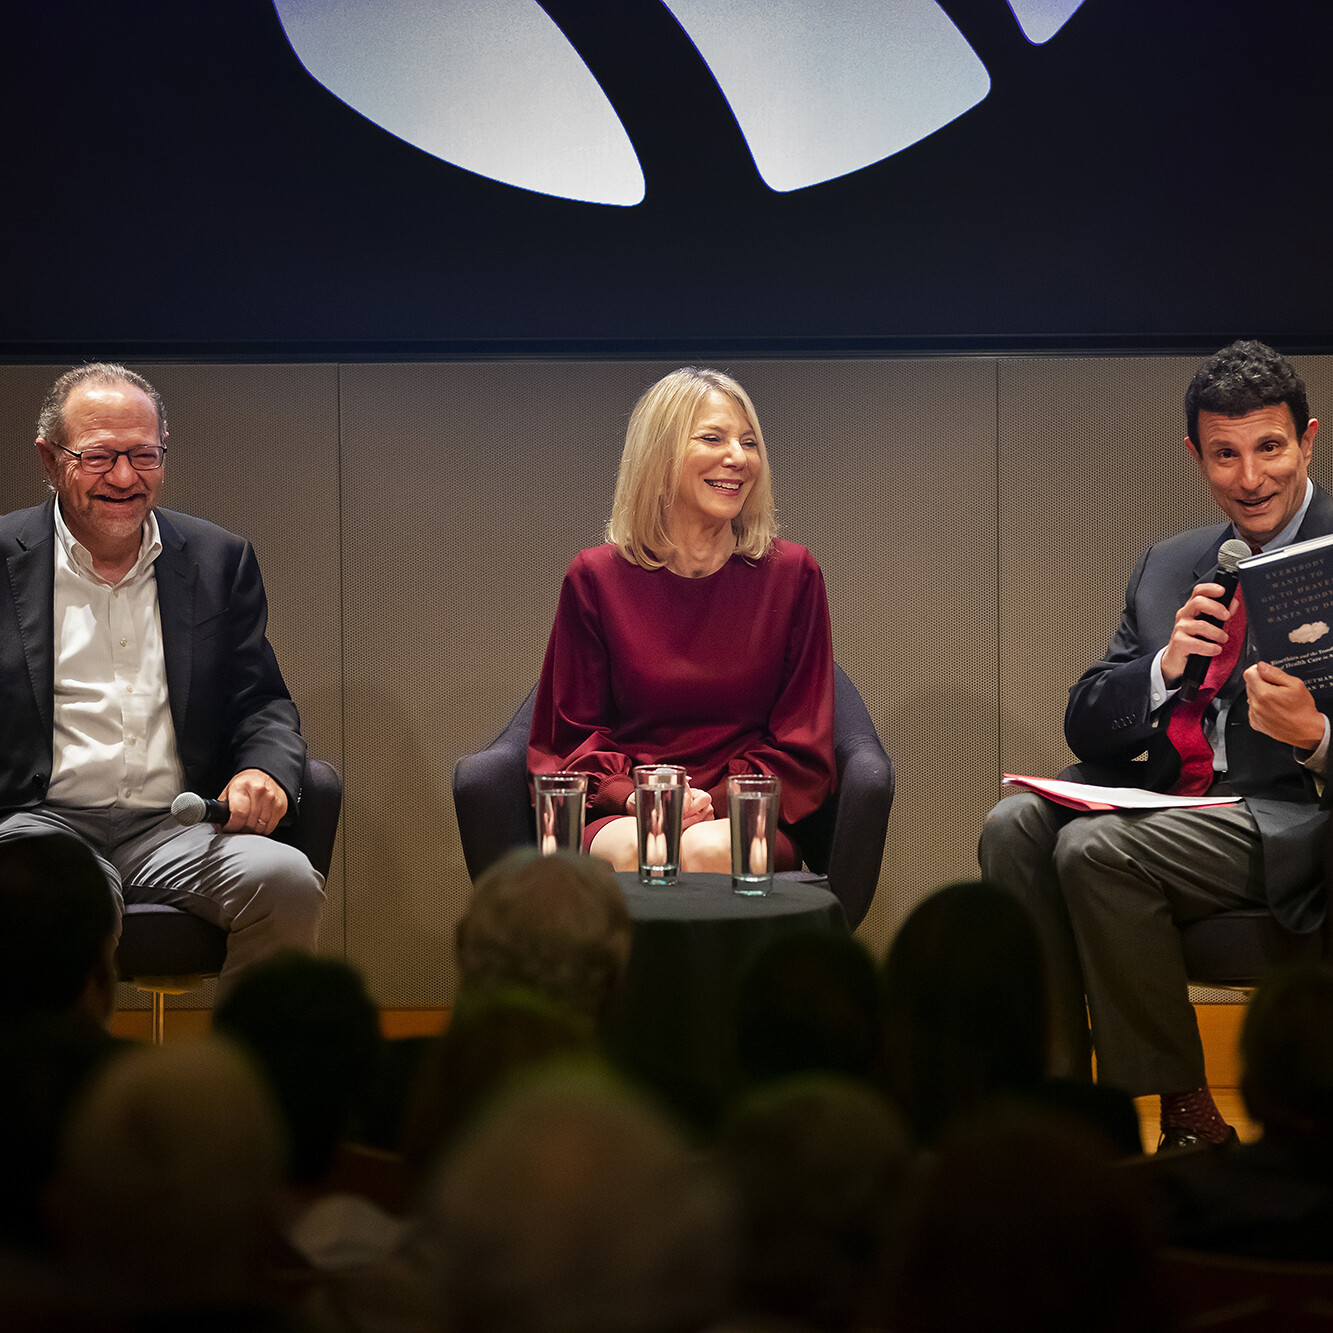 Amy Gutmann, Penn President - 2019 New York Public Library Book Discussion